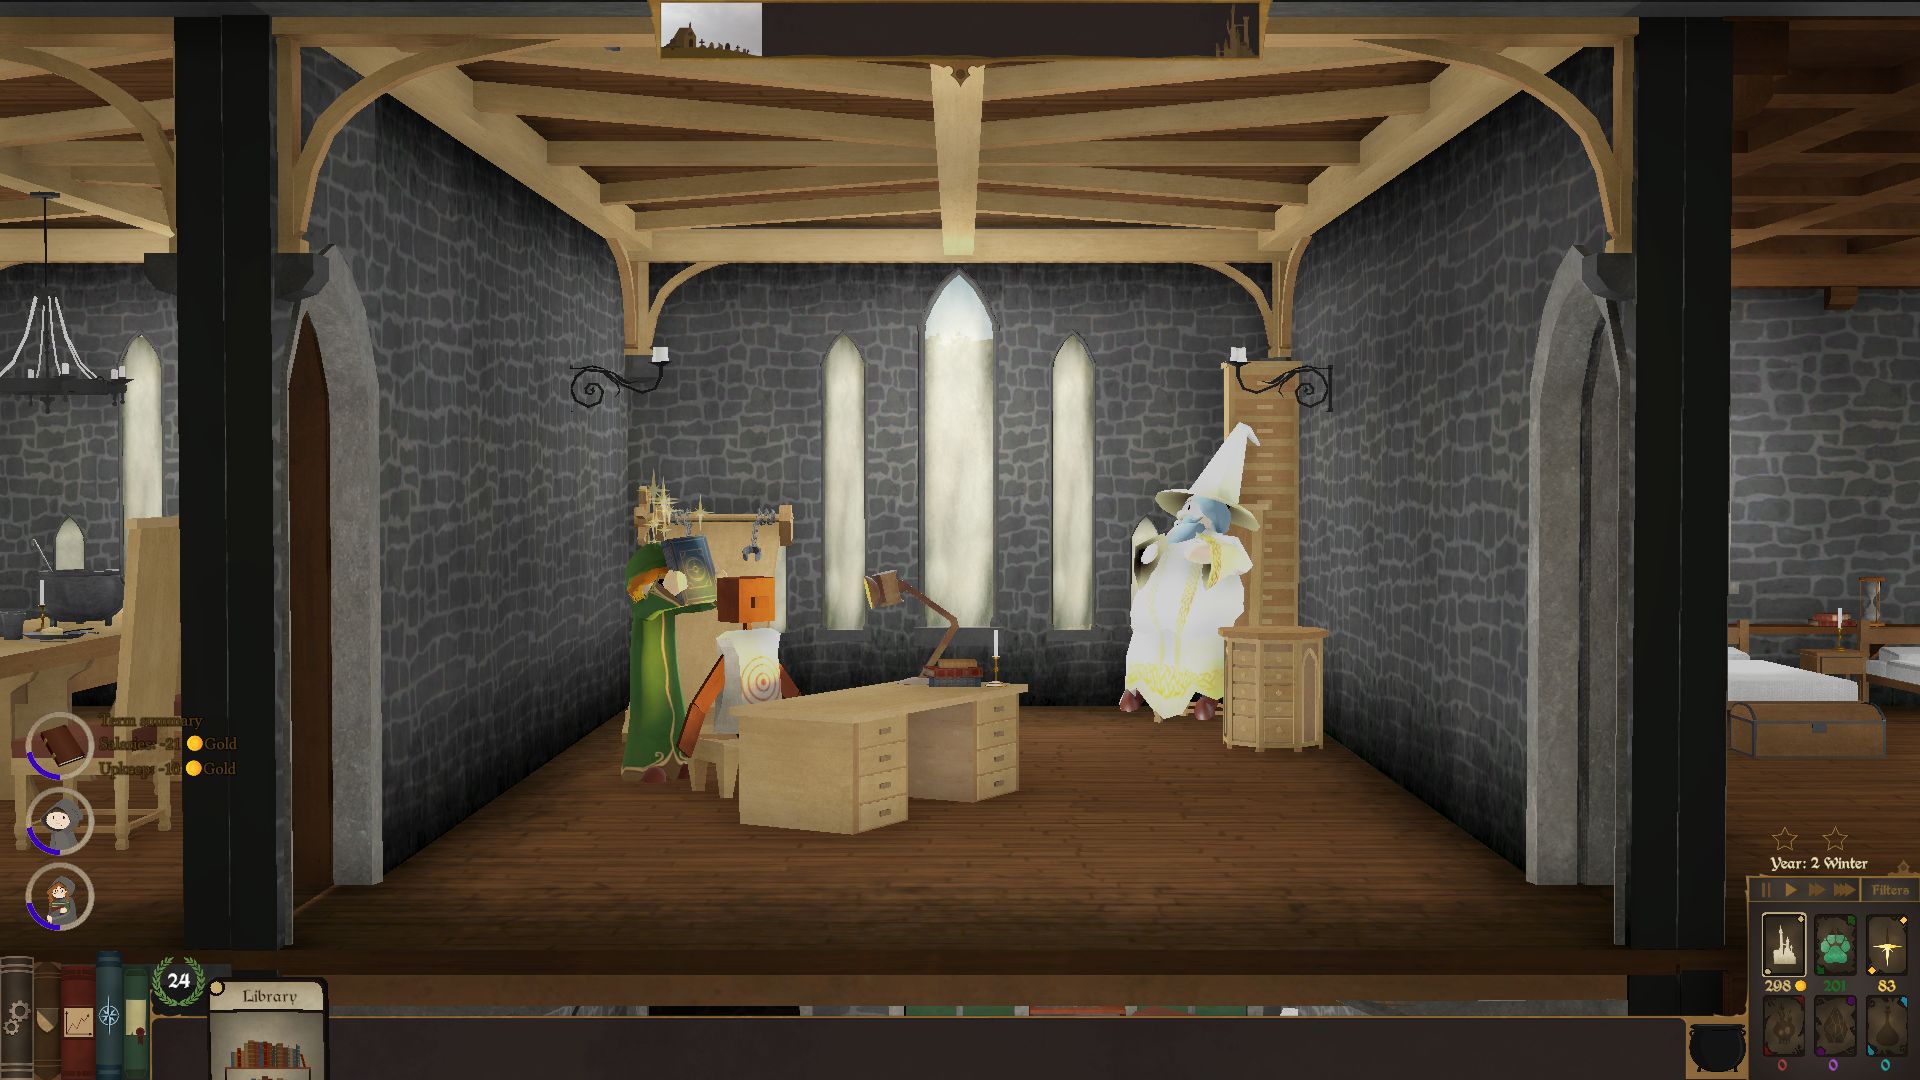 A classroom in a school in Spellcaster University, with a dummy interrogation set up.